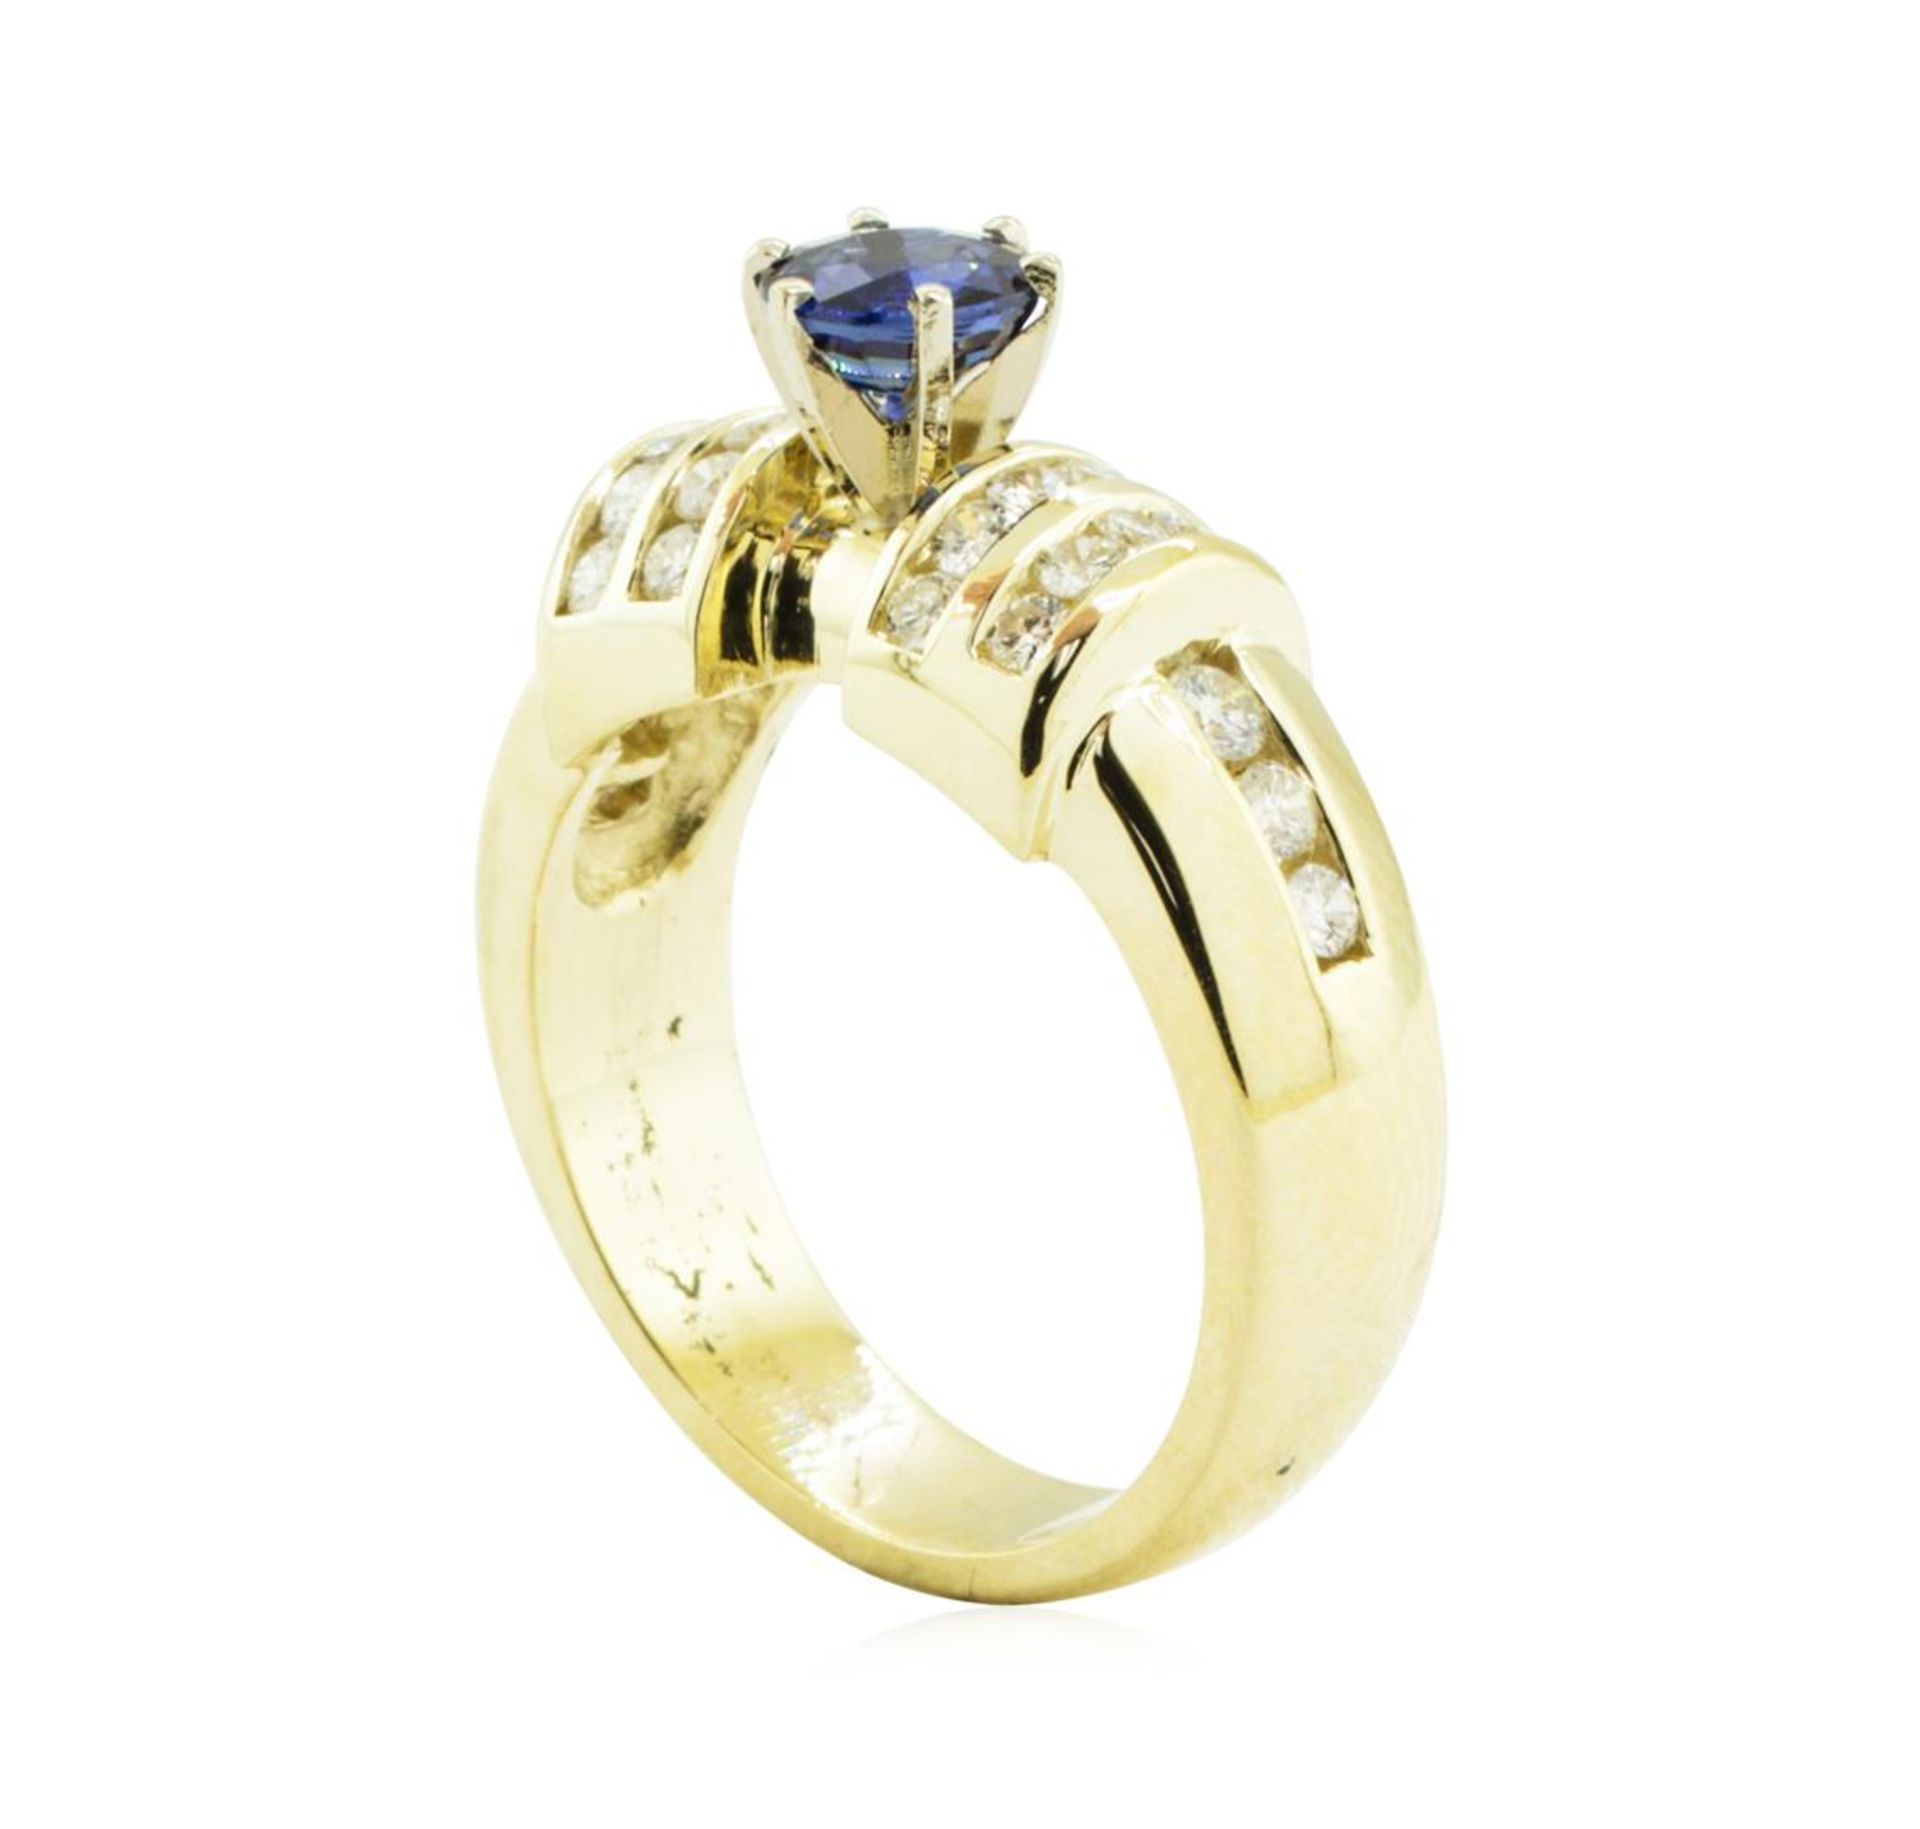 1.40 ctw Round Brilliant Blue Sapphire And Diamond Ring - 14KT Yellow Gold - Image 4 of 5